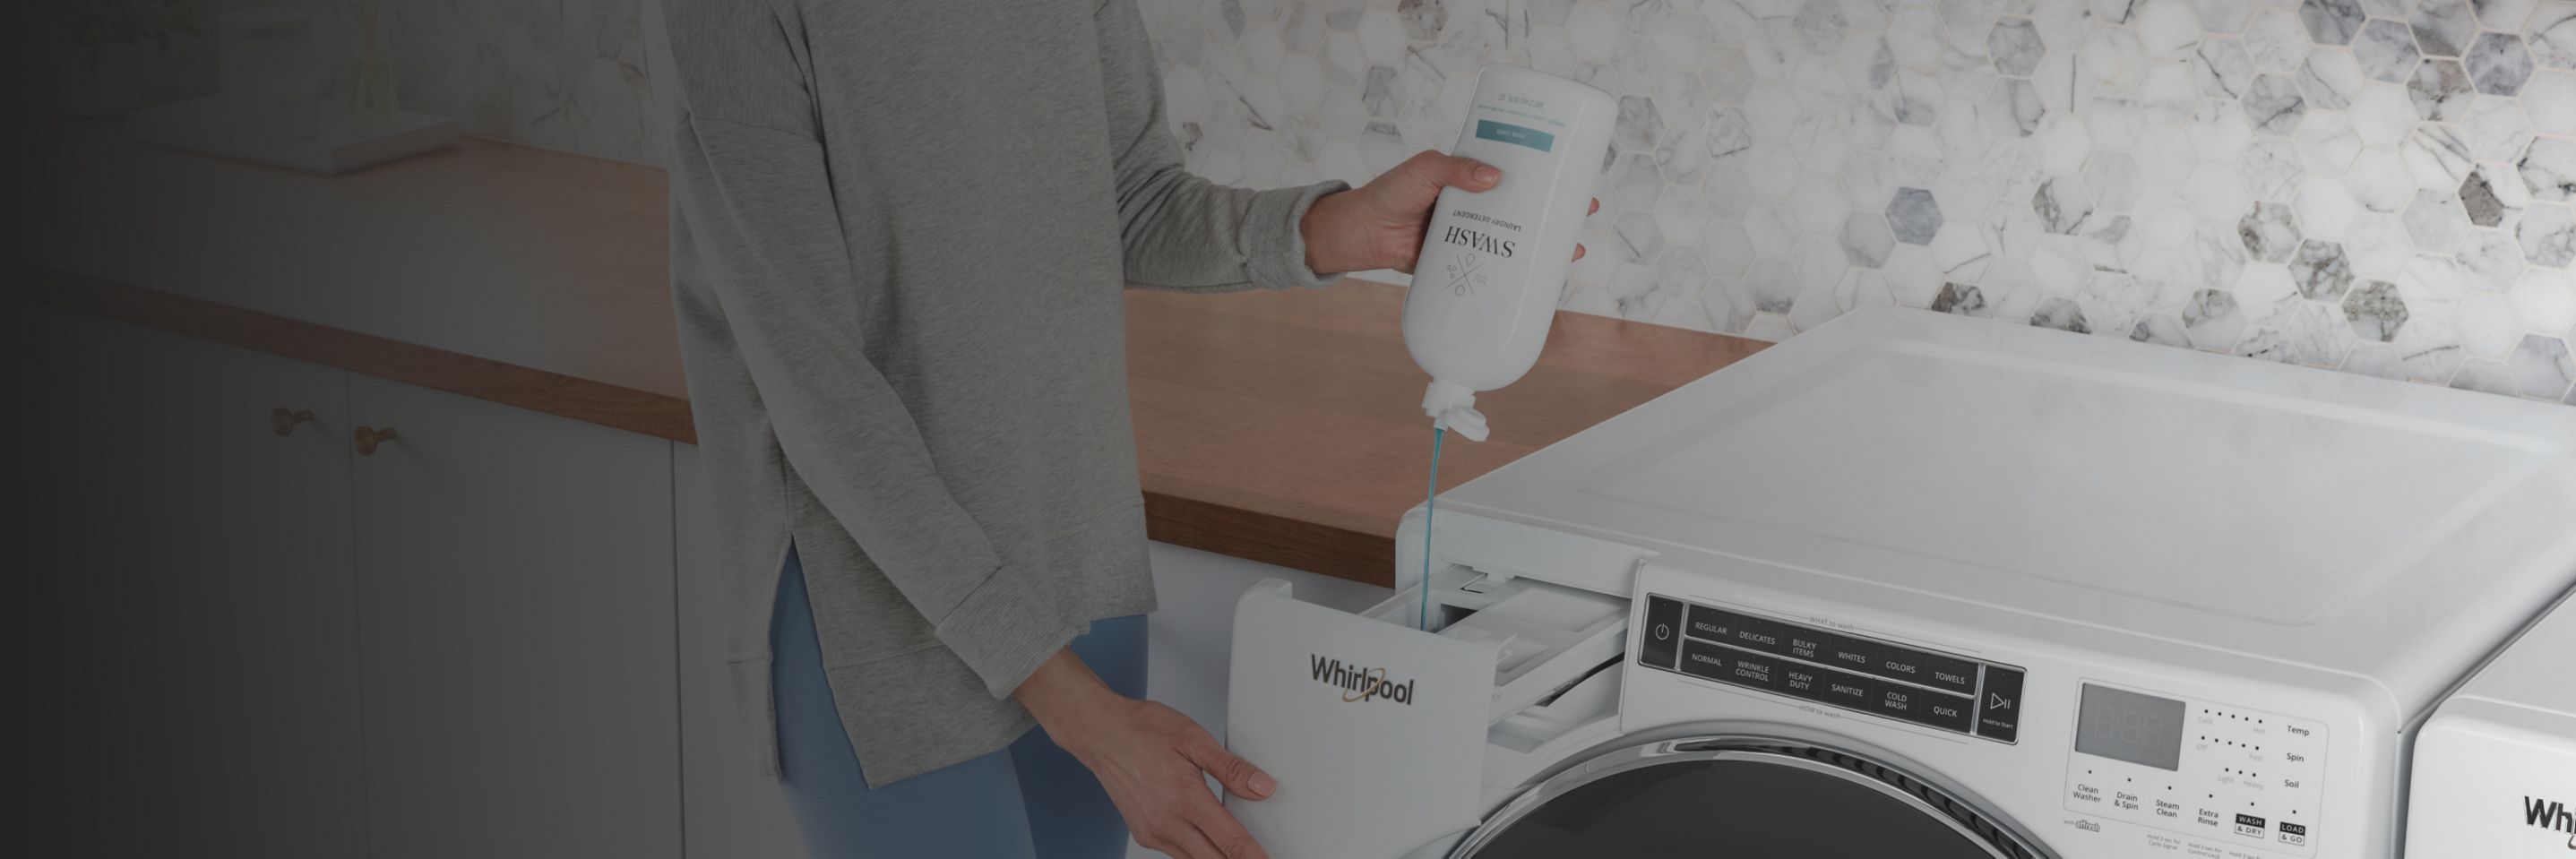 Adding Swash® Laundry Detergent to the washer.